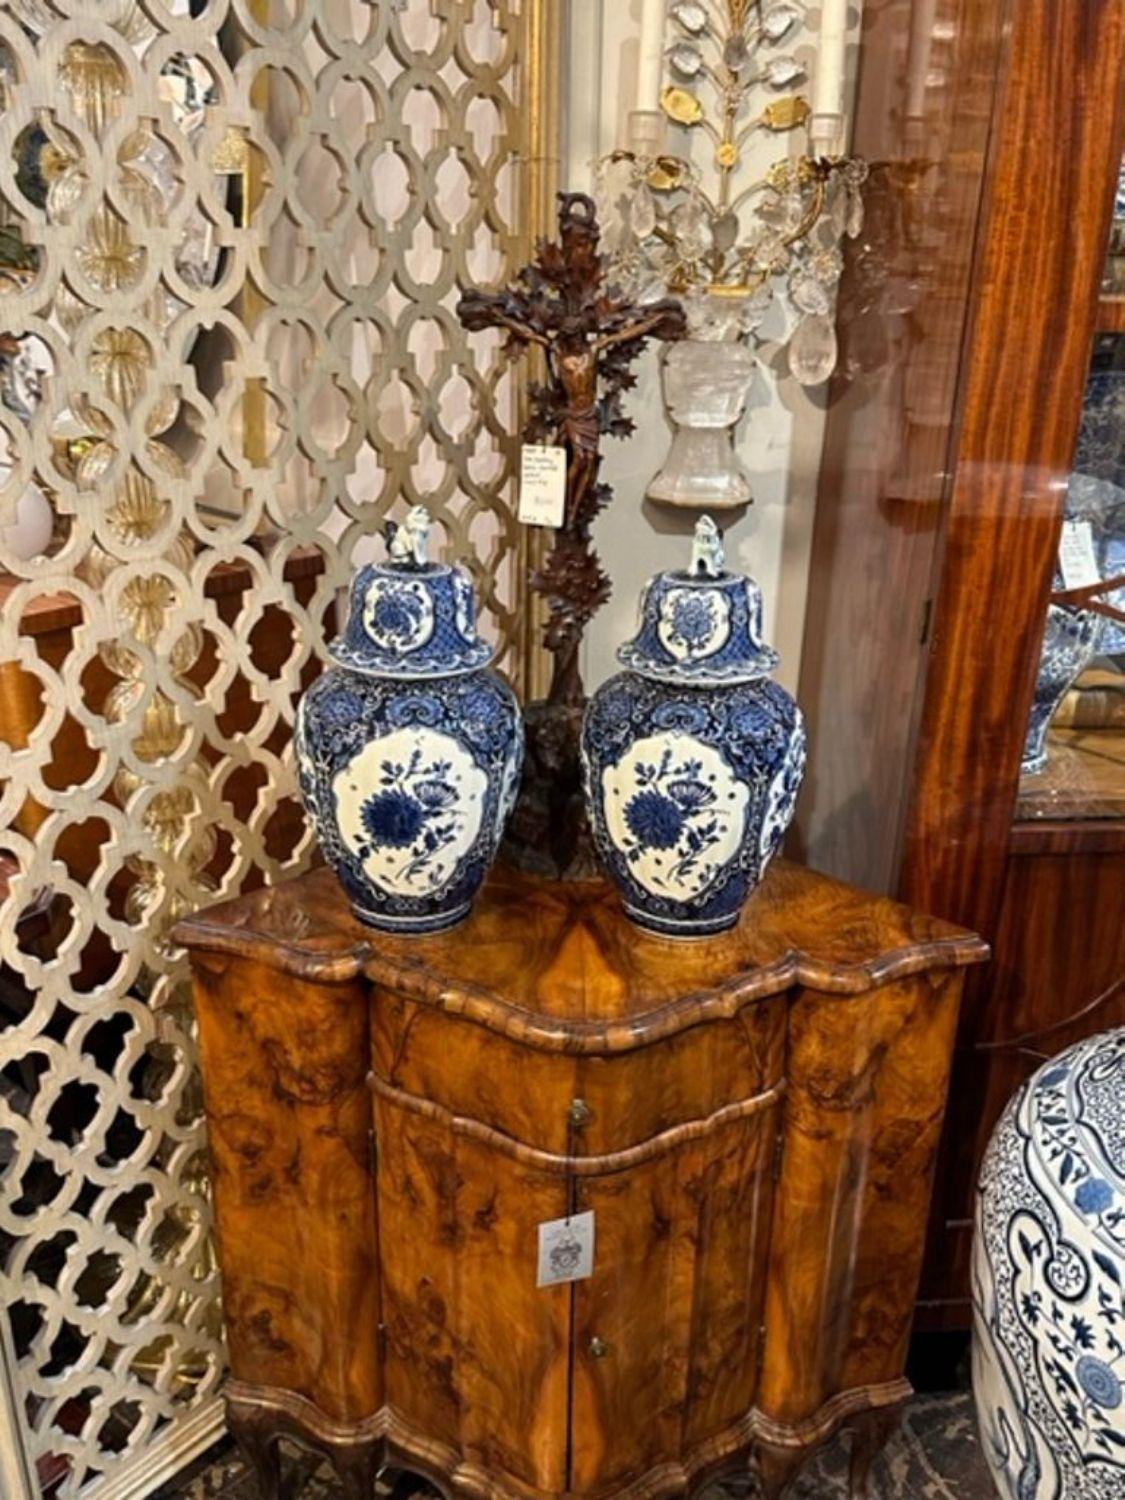 Pair of early 20th century Delft blue and white porcelain jars. circa 1920. A timeless and classic touch for a fine interior.